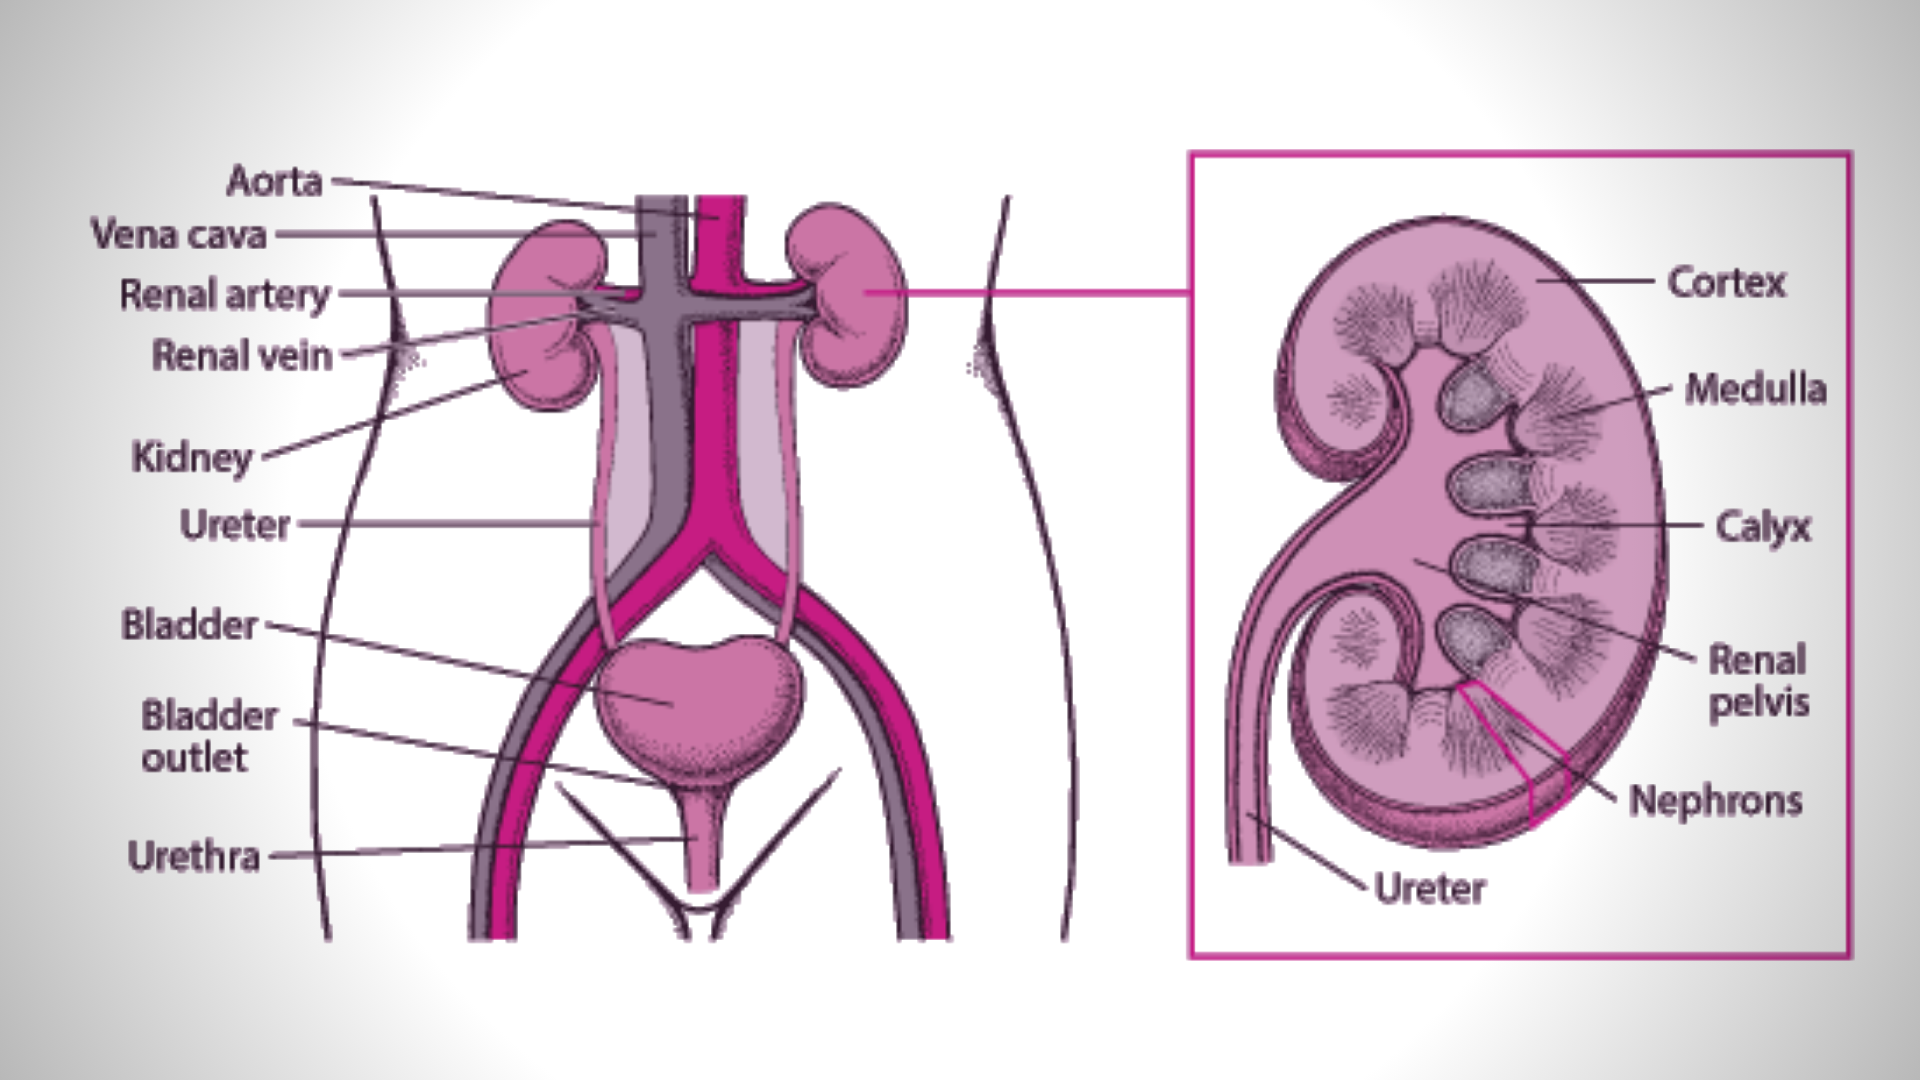 What is Urinary Tract Infection